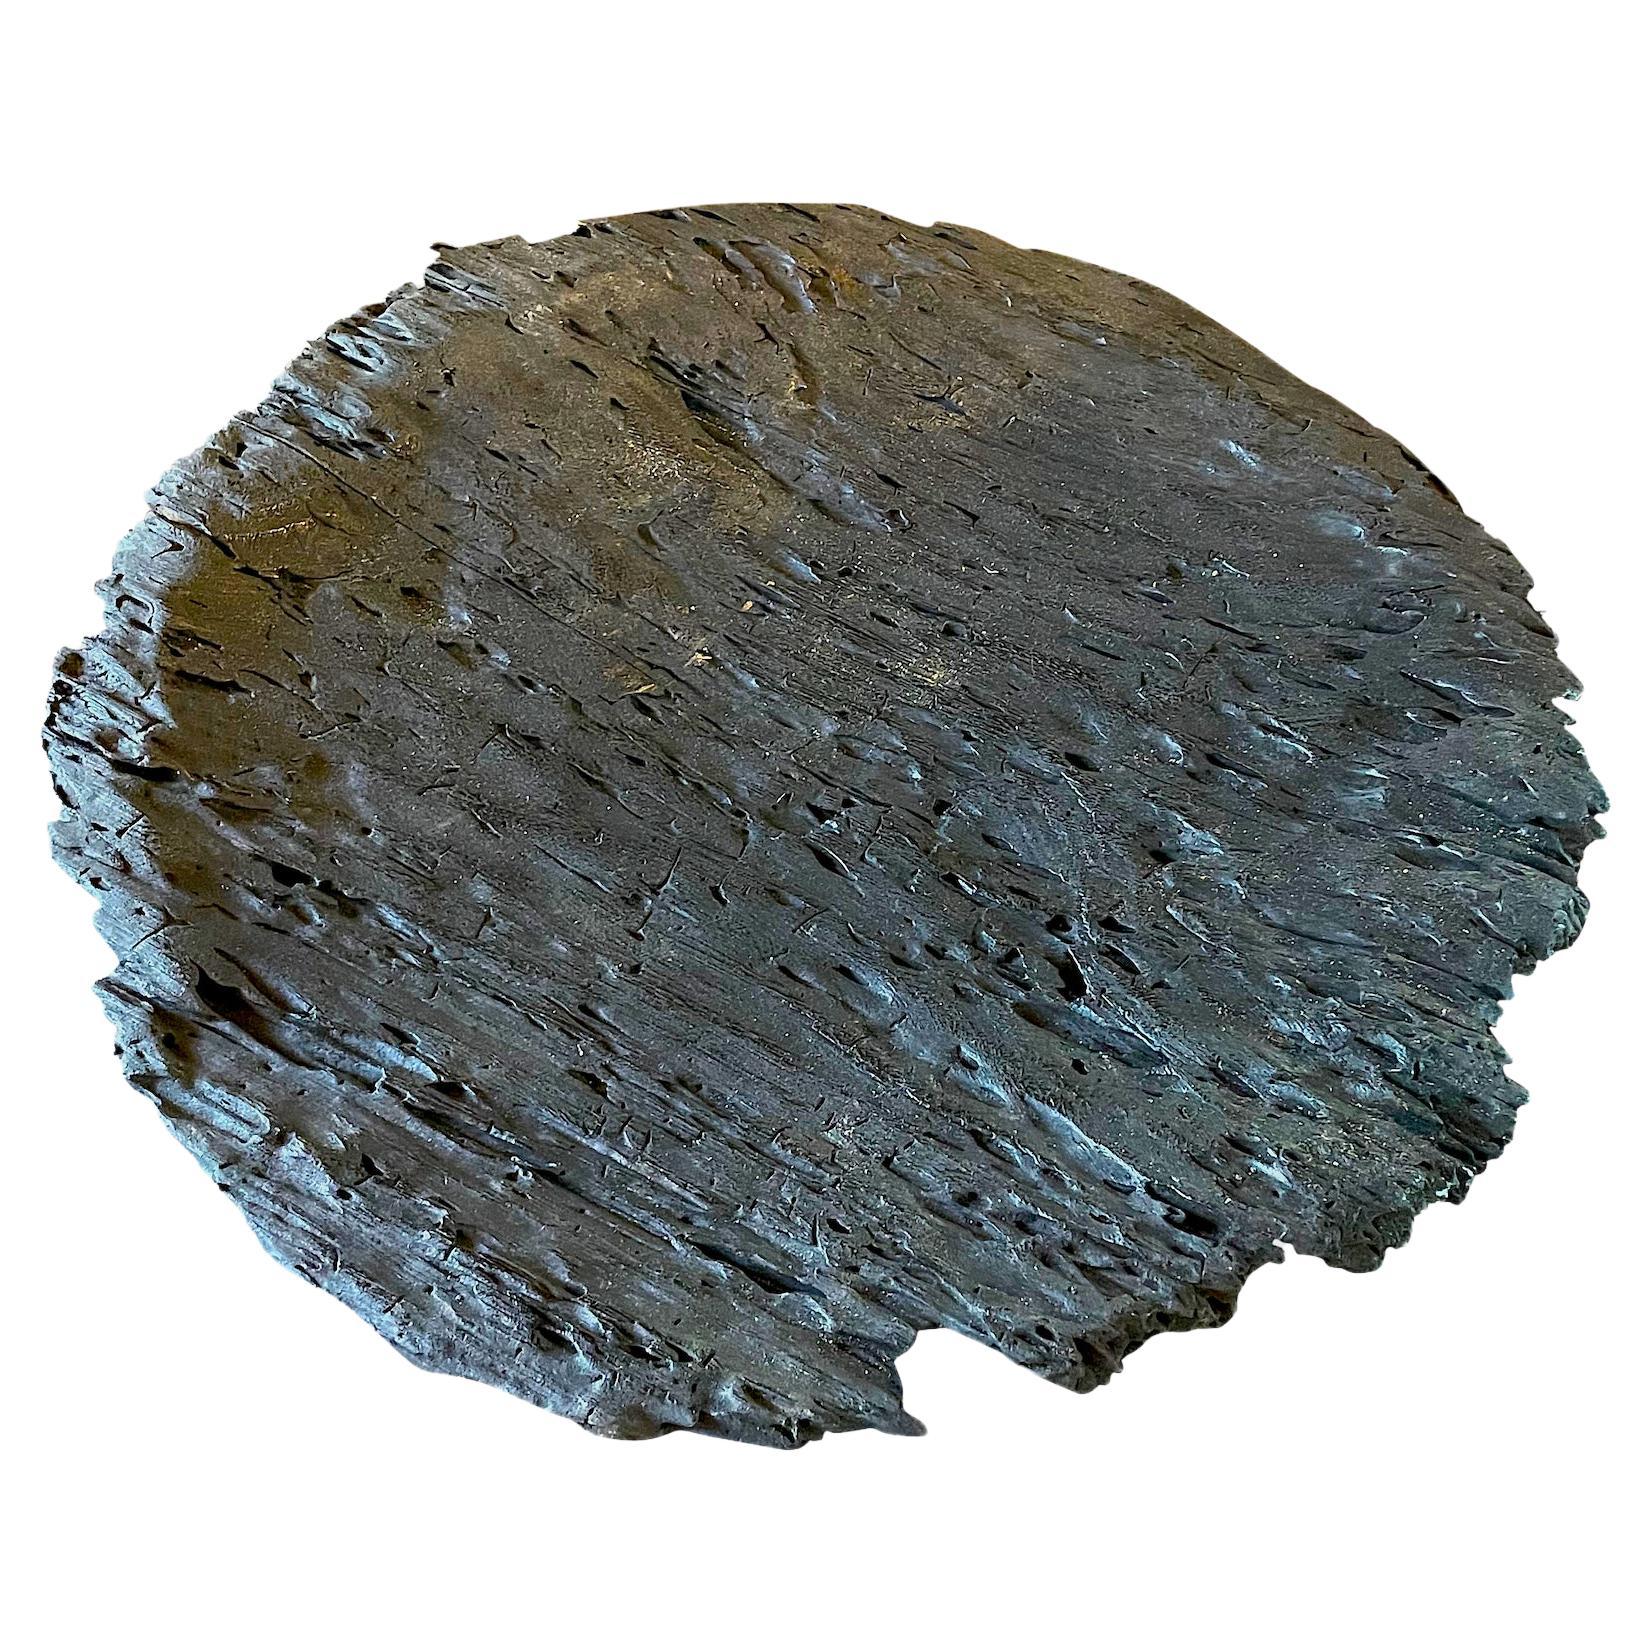 Contemporary Indonesia large wood plate charred to give texture and patina.